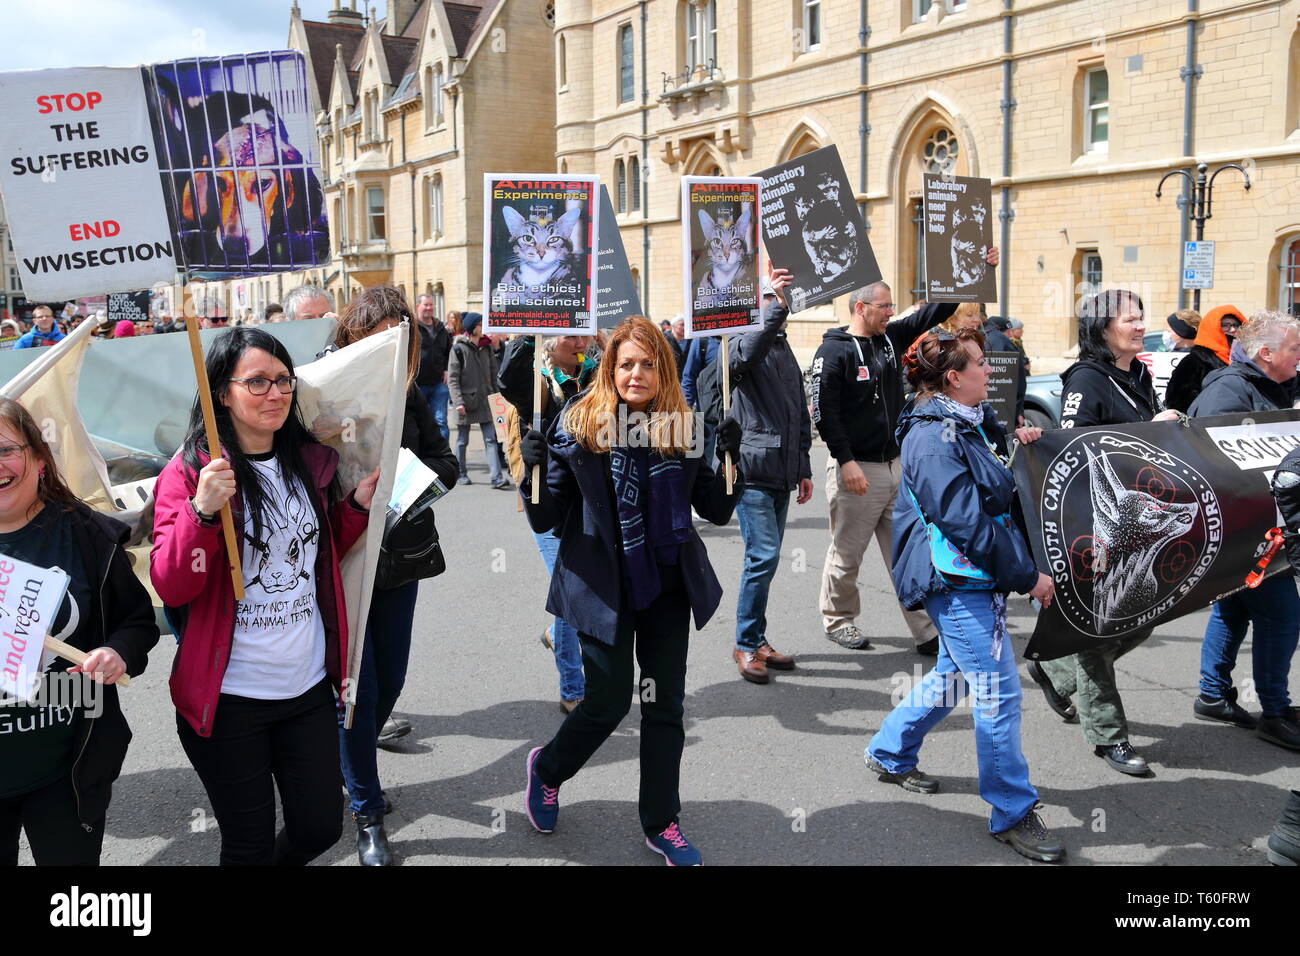 A large number of animal rights campaigners gather in Oxford to protest against vivisection of animals. Stock Photo